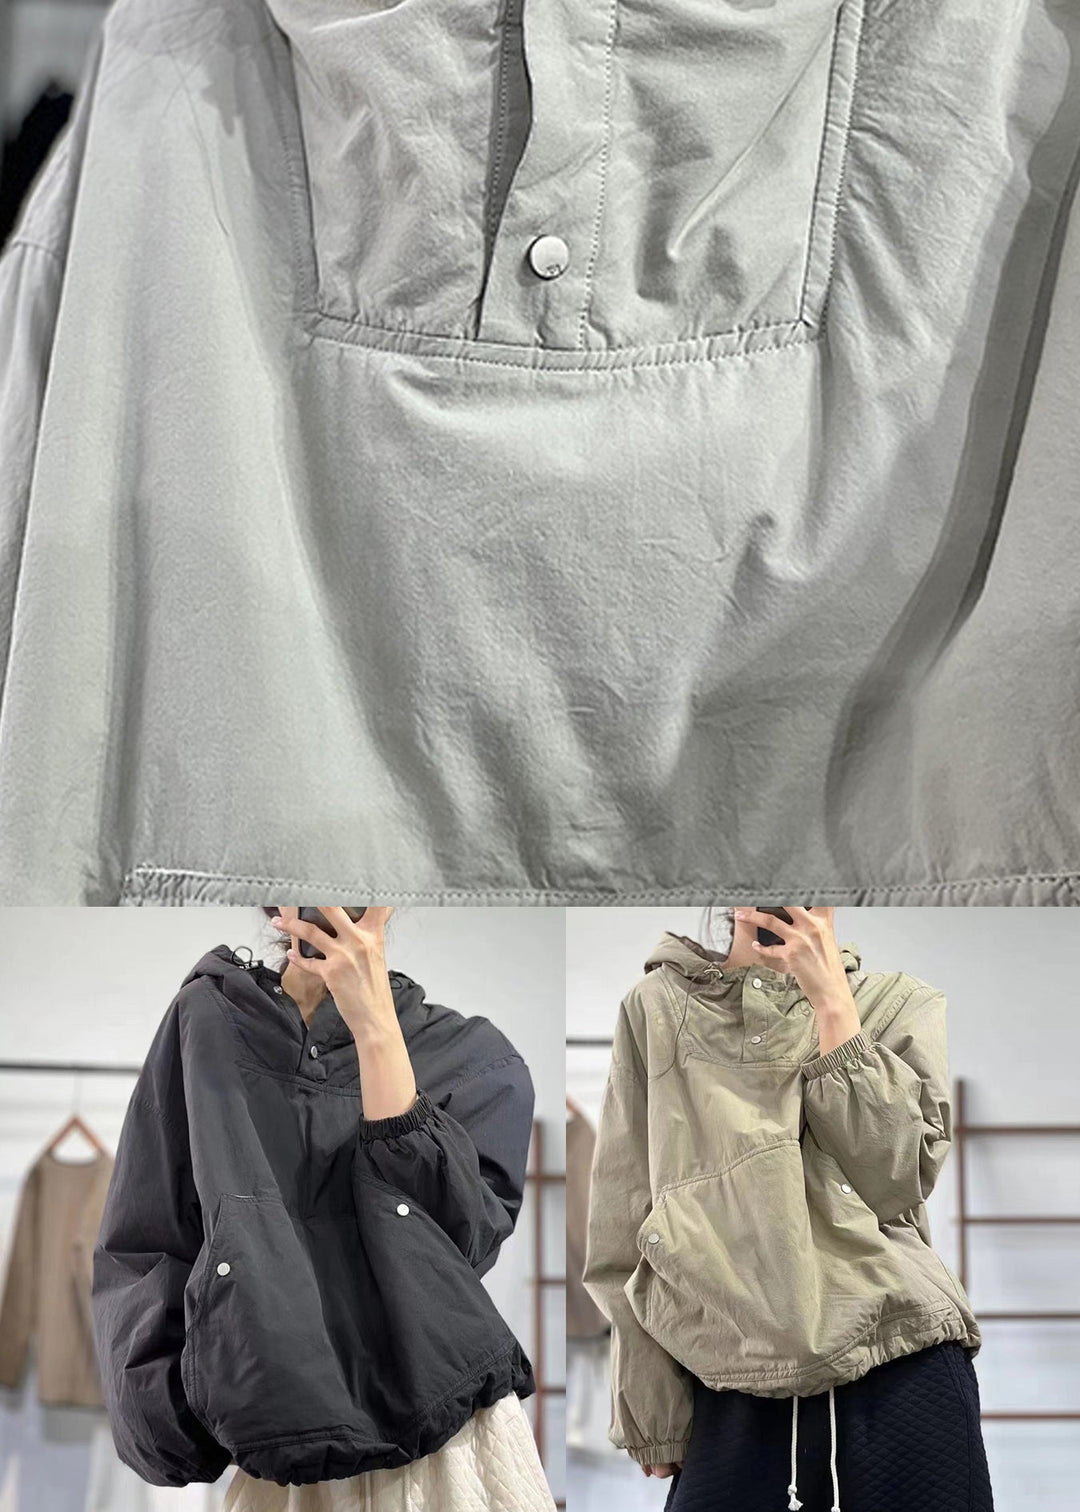 Unique Grey Cinched Hooded Fine Cotton Filled Tops Lantern Sleeve